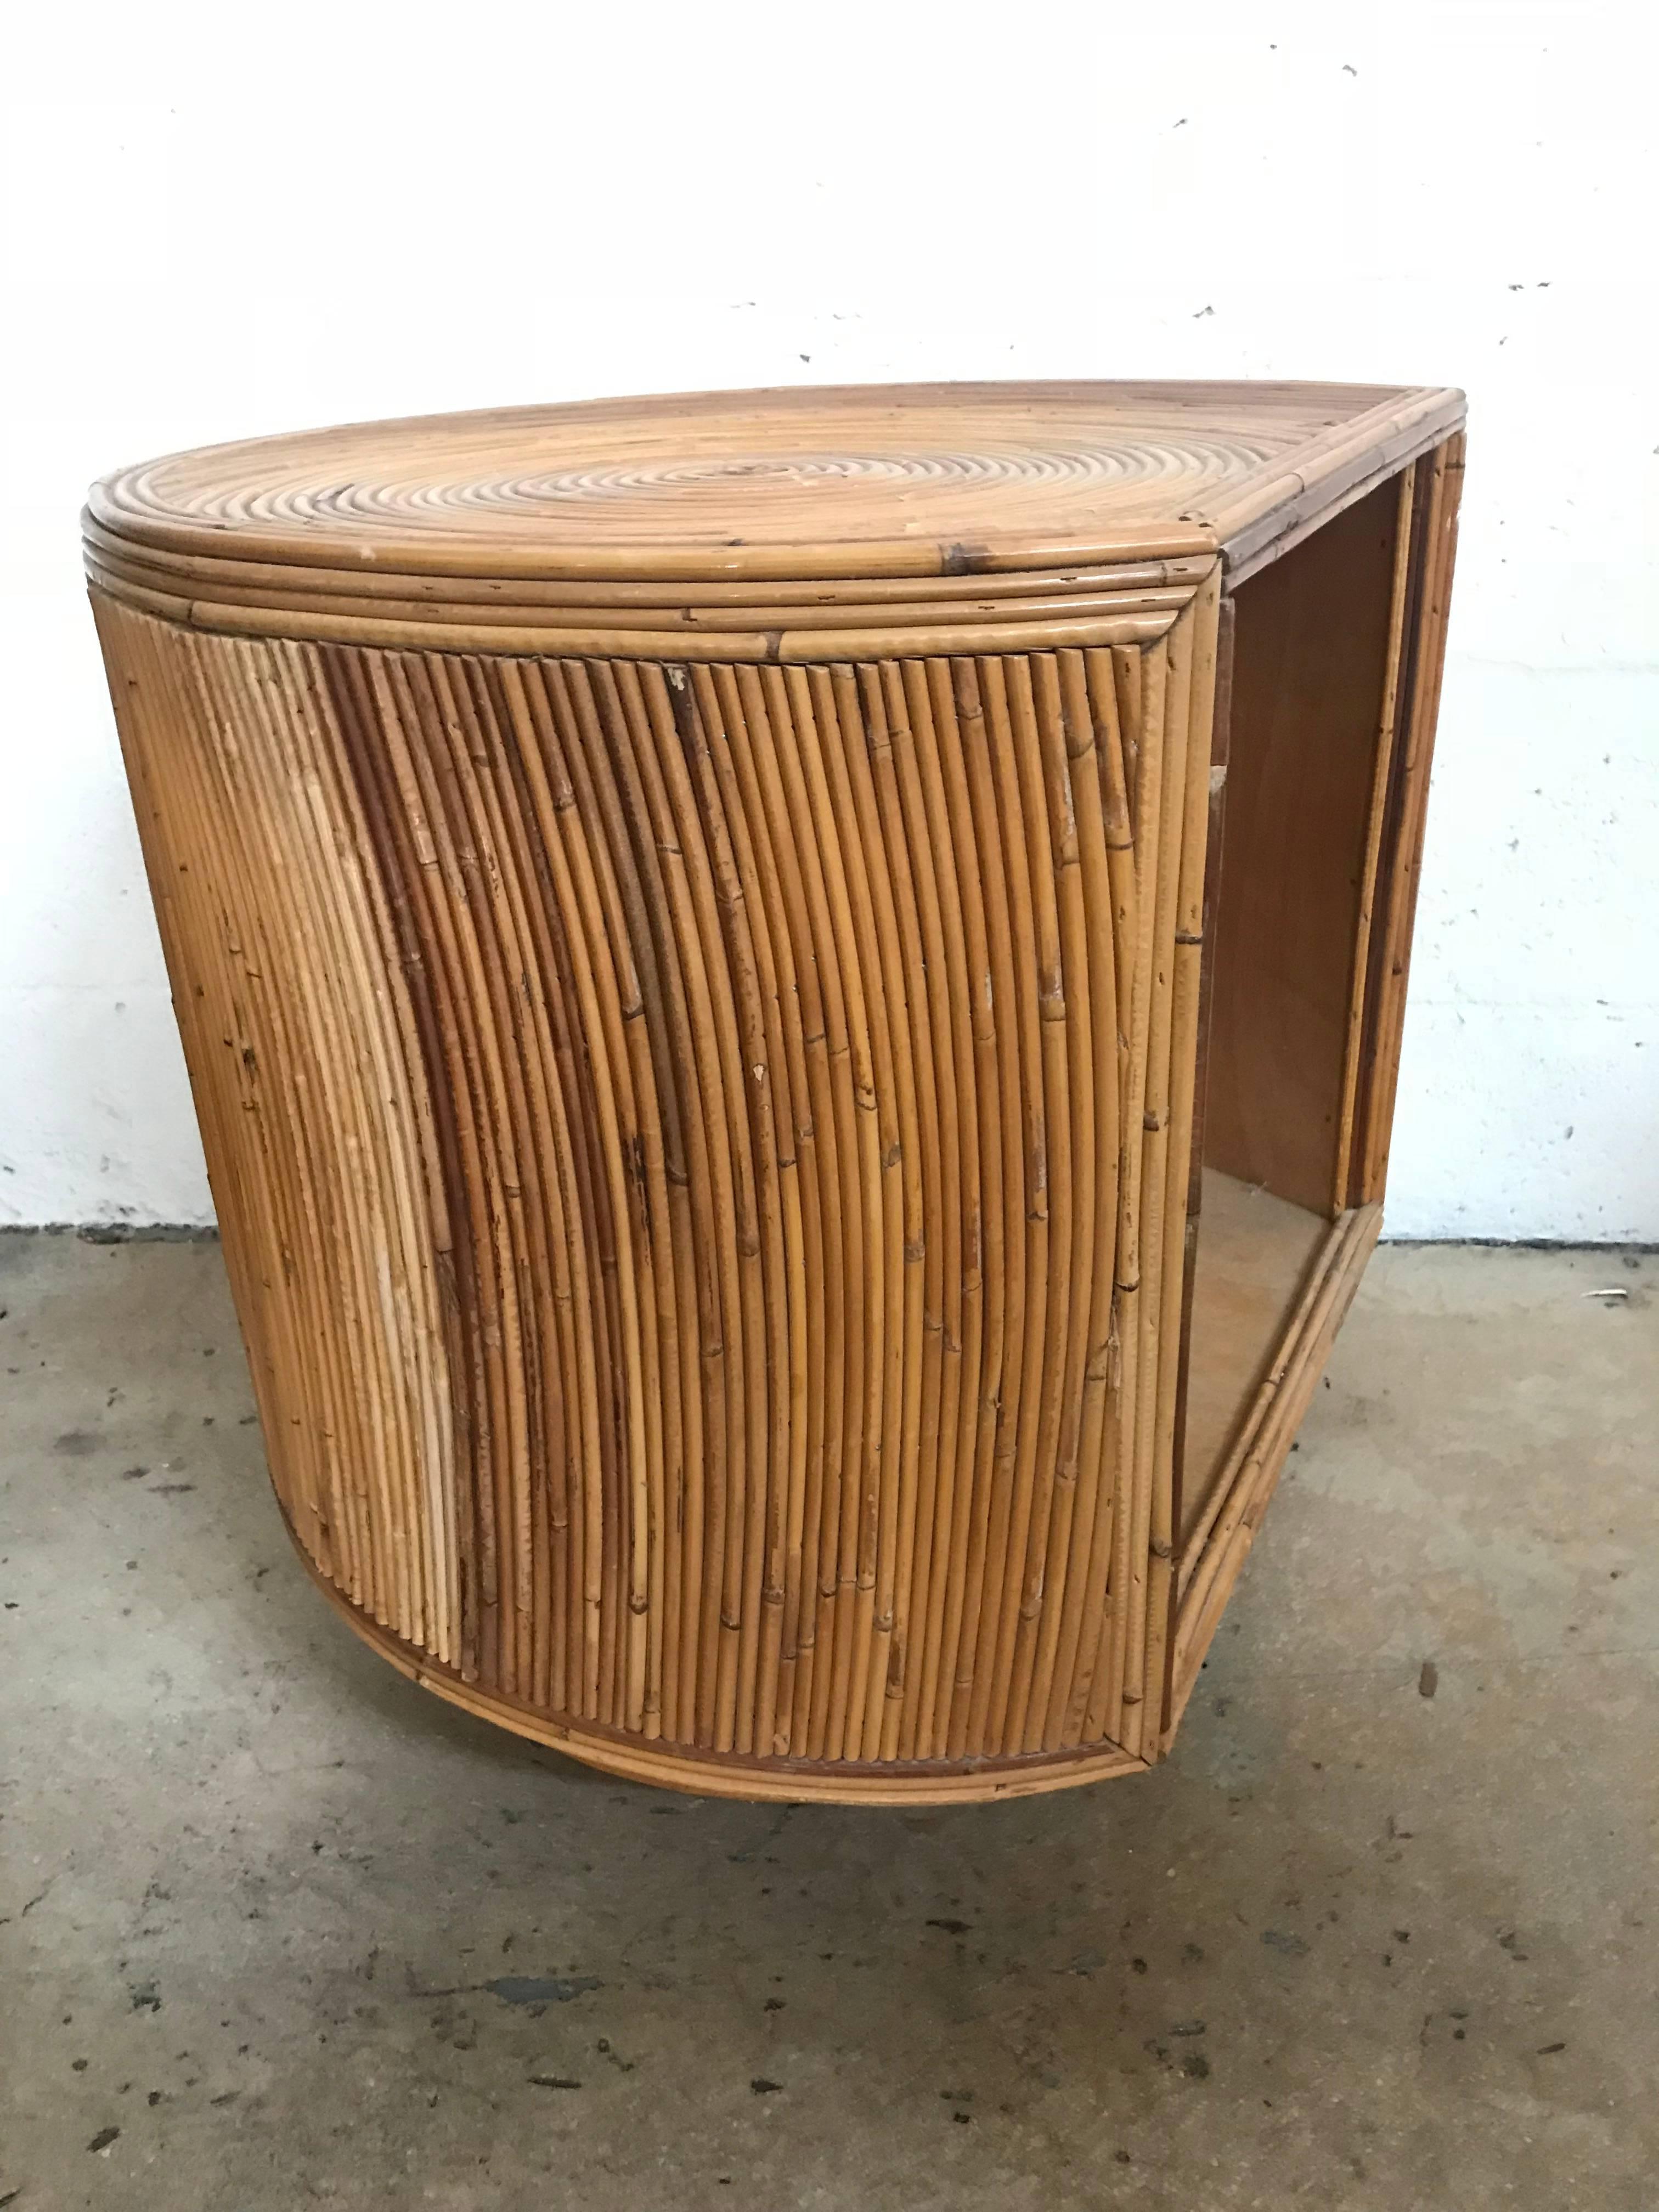 Pair of nightstand, end, or side tables that rotate, revolve, or swivel, rendered in split reed, rattan, bamboo with a beautiful radiating circle motif in the style of Gabriella Crespi.

Nightstands interior height 5 inches from floor.